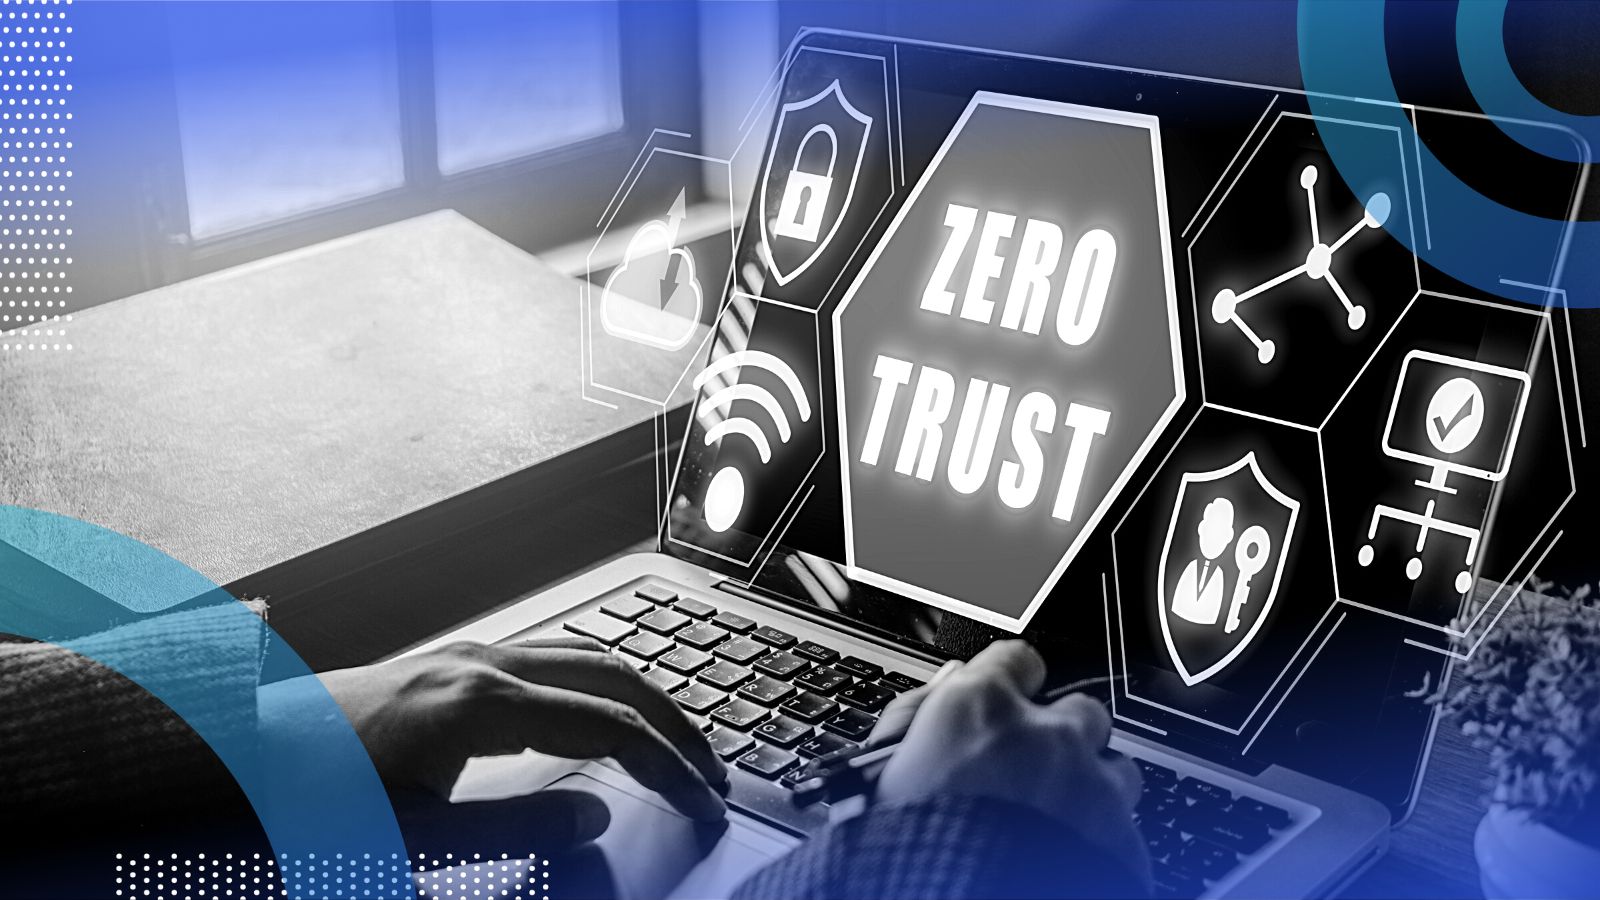 Zero Trust: What It Is and Important Aspects of It